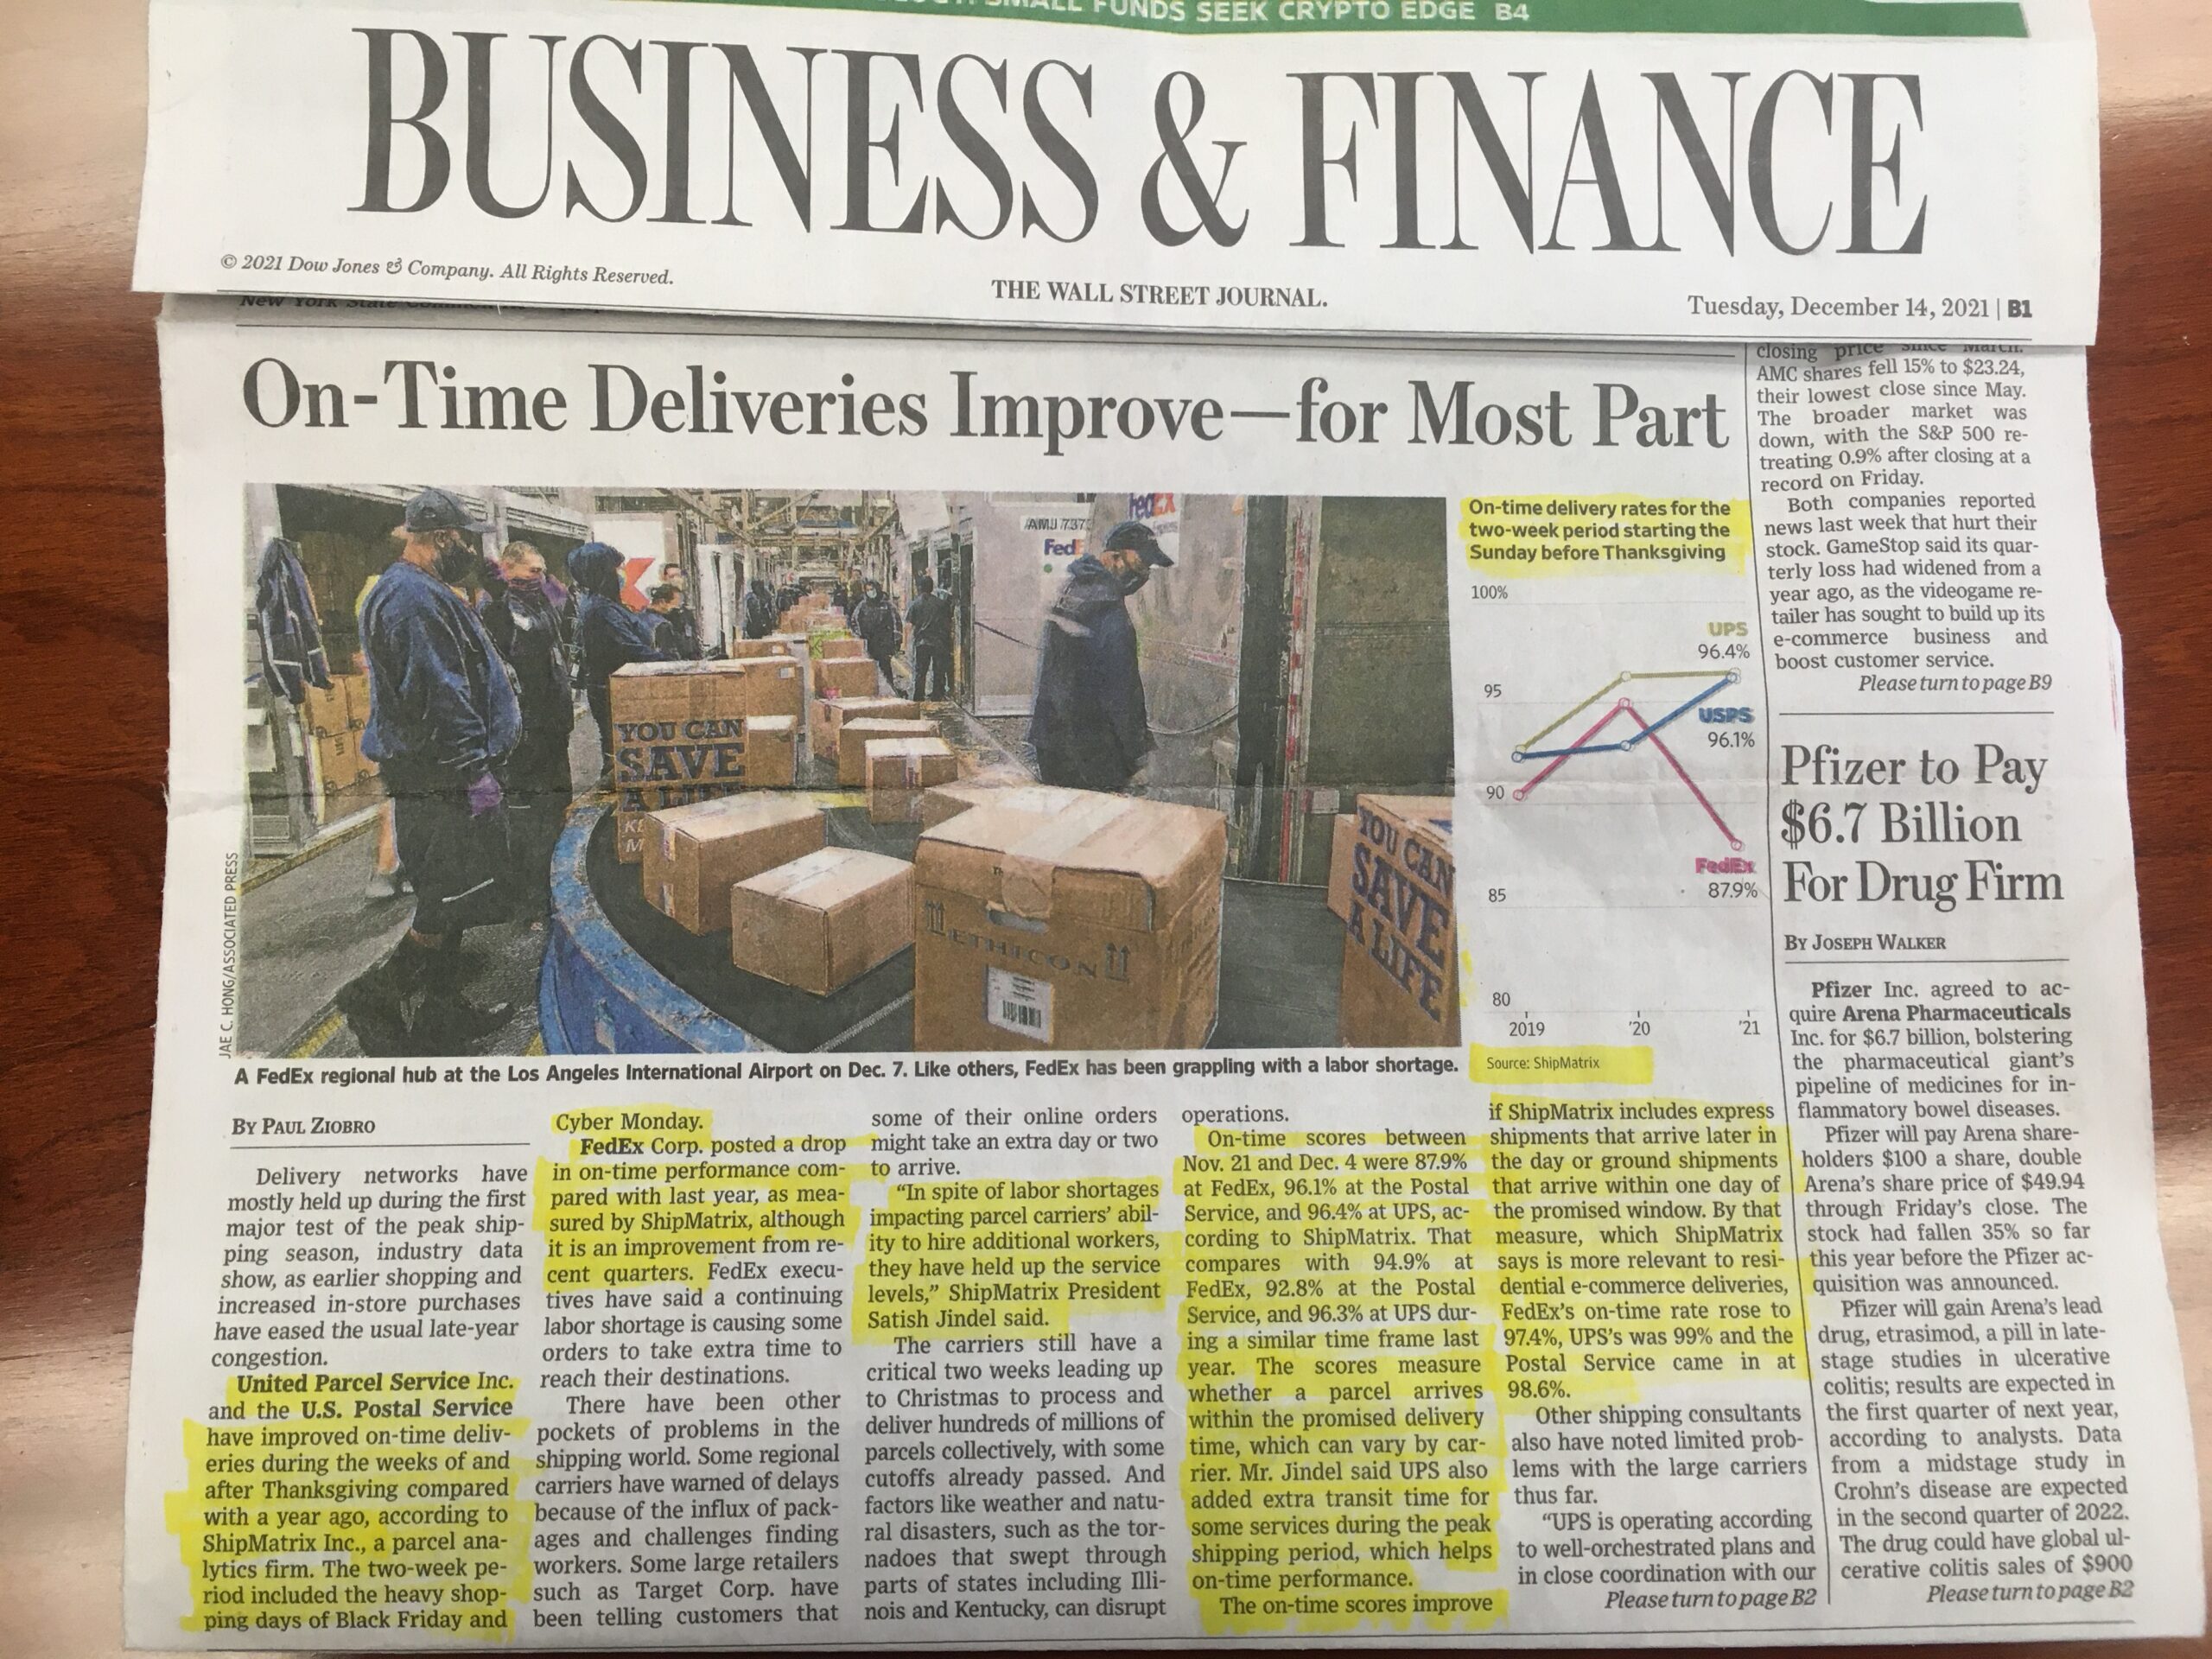 On-Time Deliveries Improve -- For Most Part - WSJ